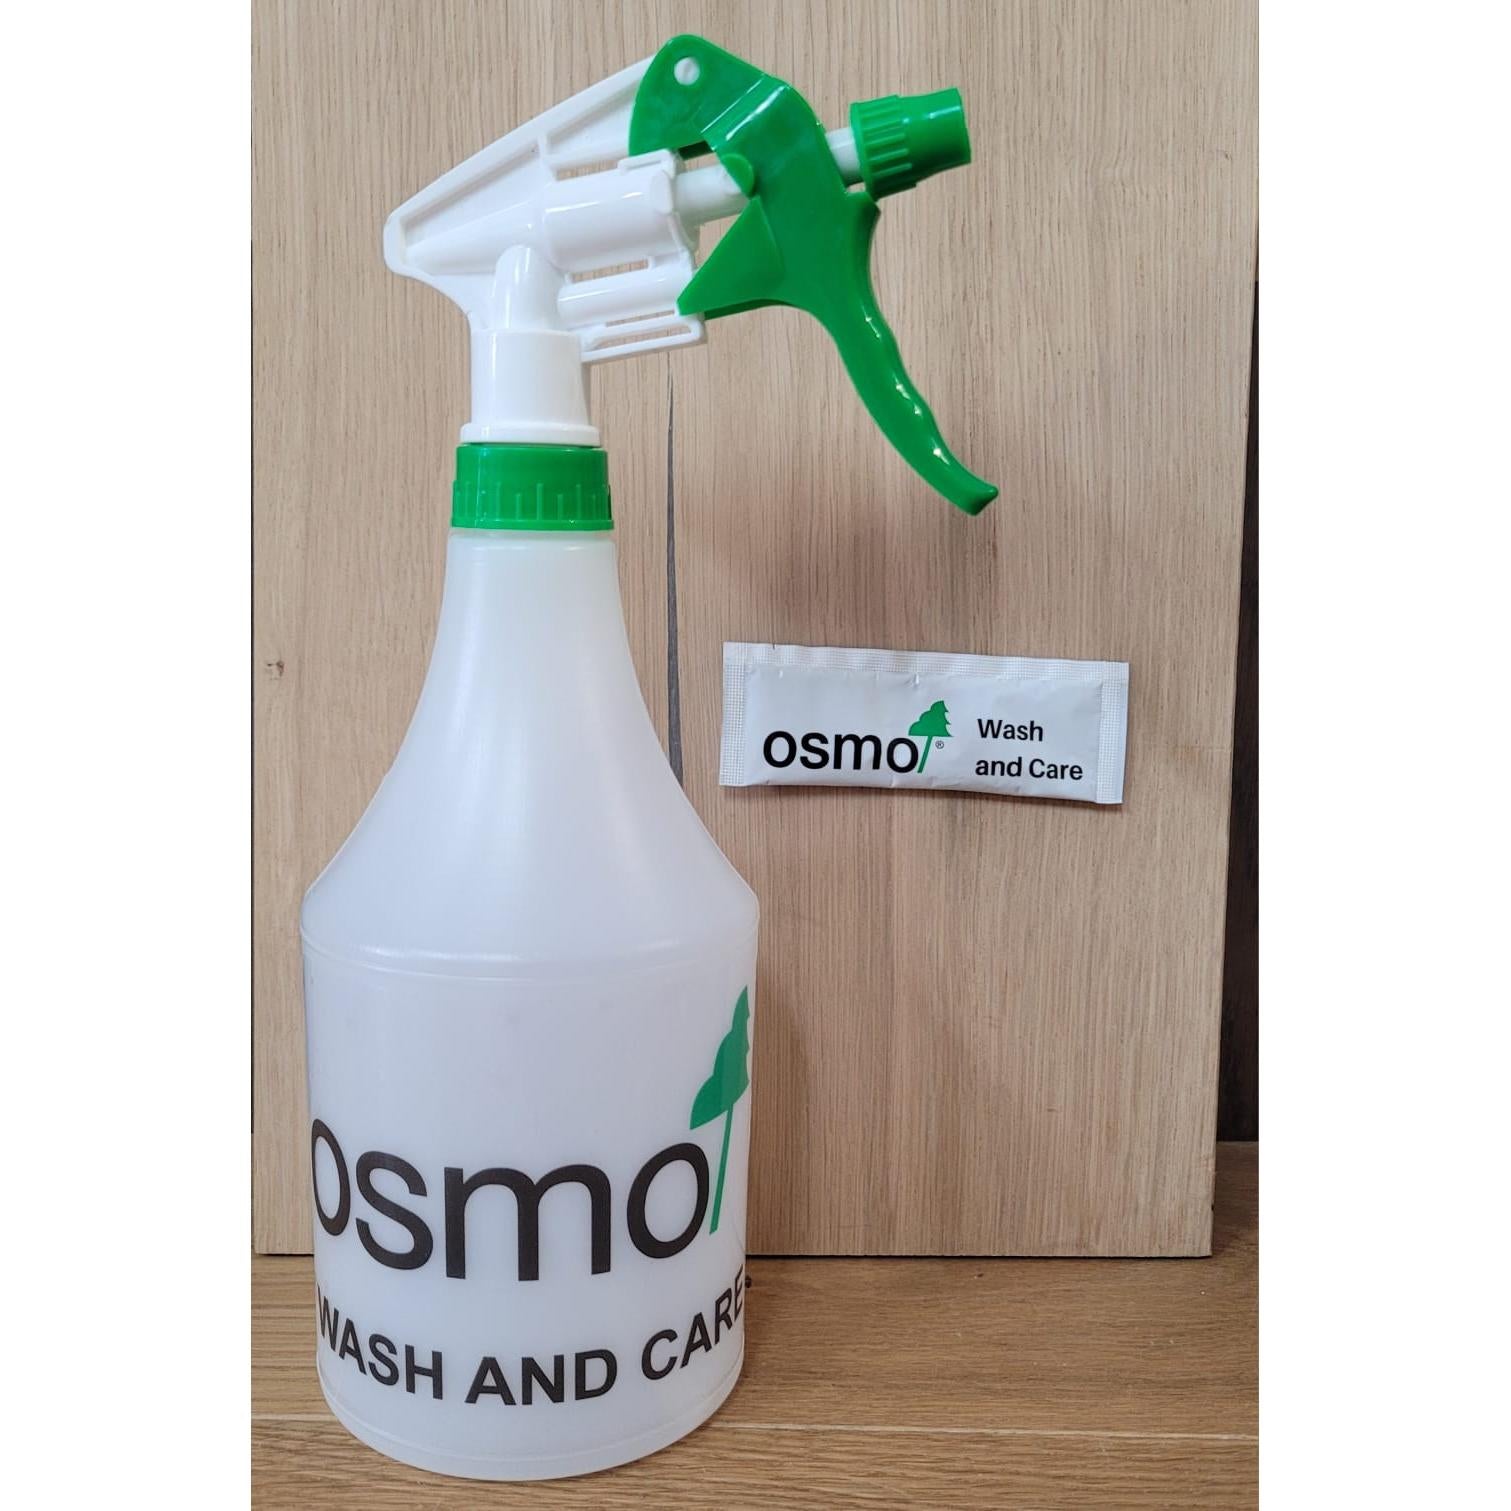 Osmo Trigger Spray Bottle 500ml + Free Wash and Care 5ml Sachet Power Tool Services